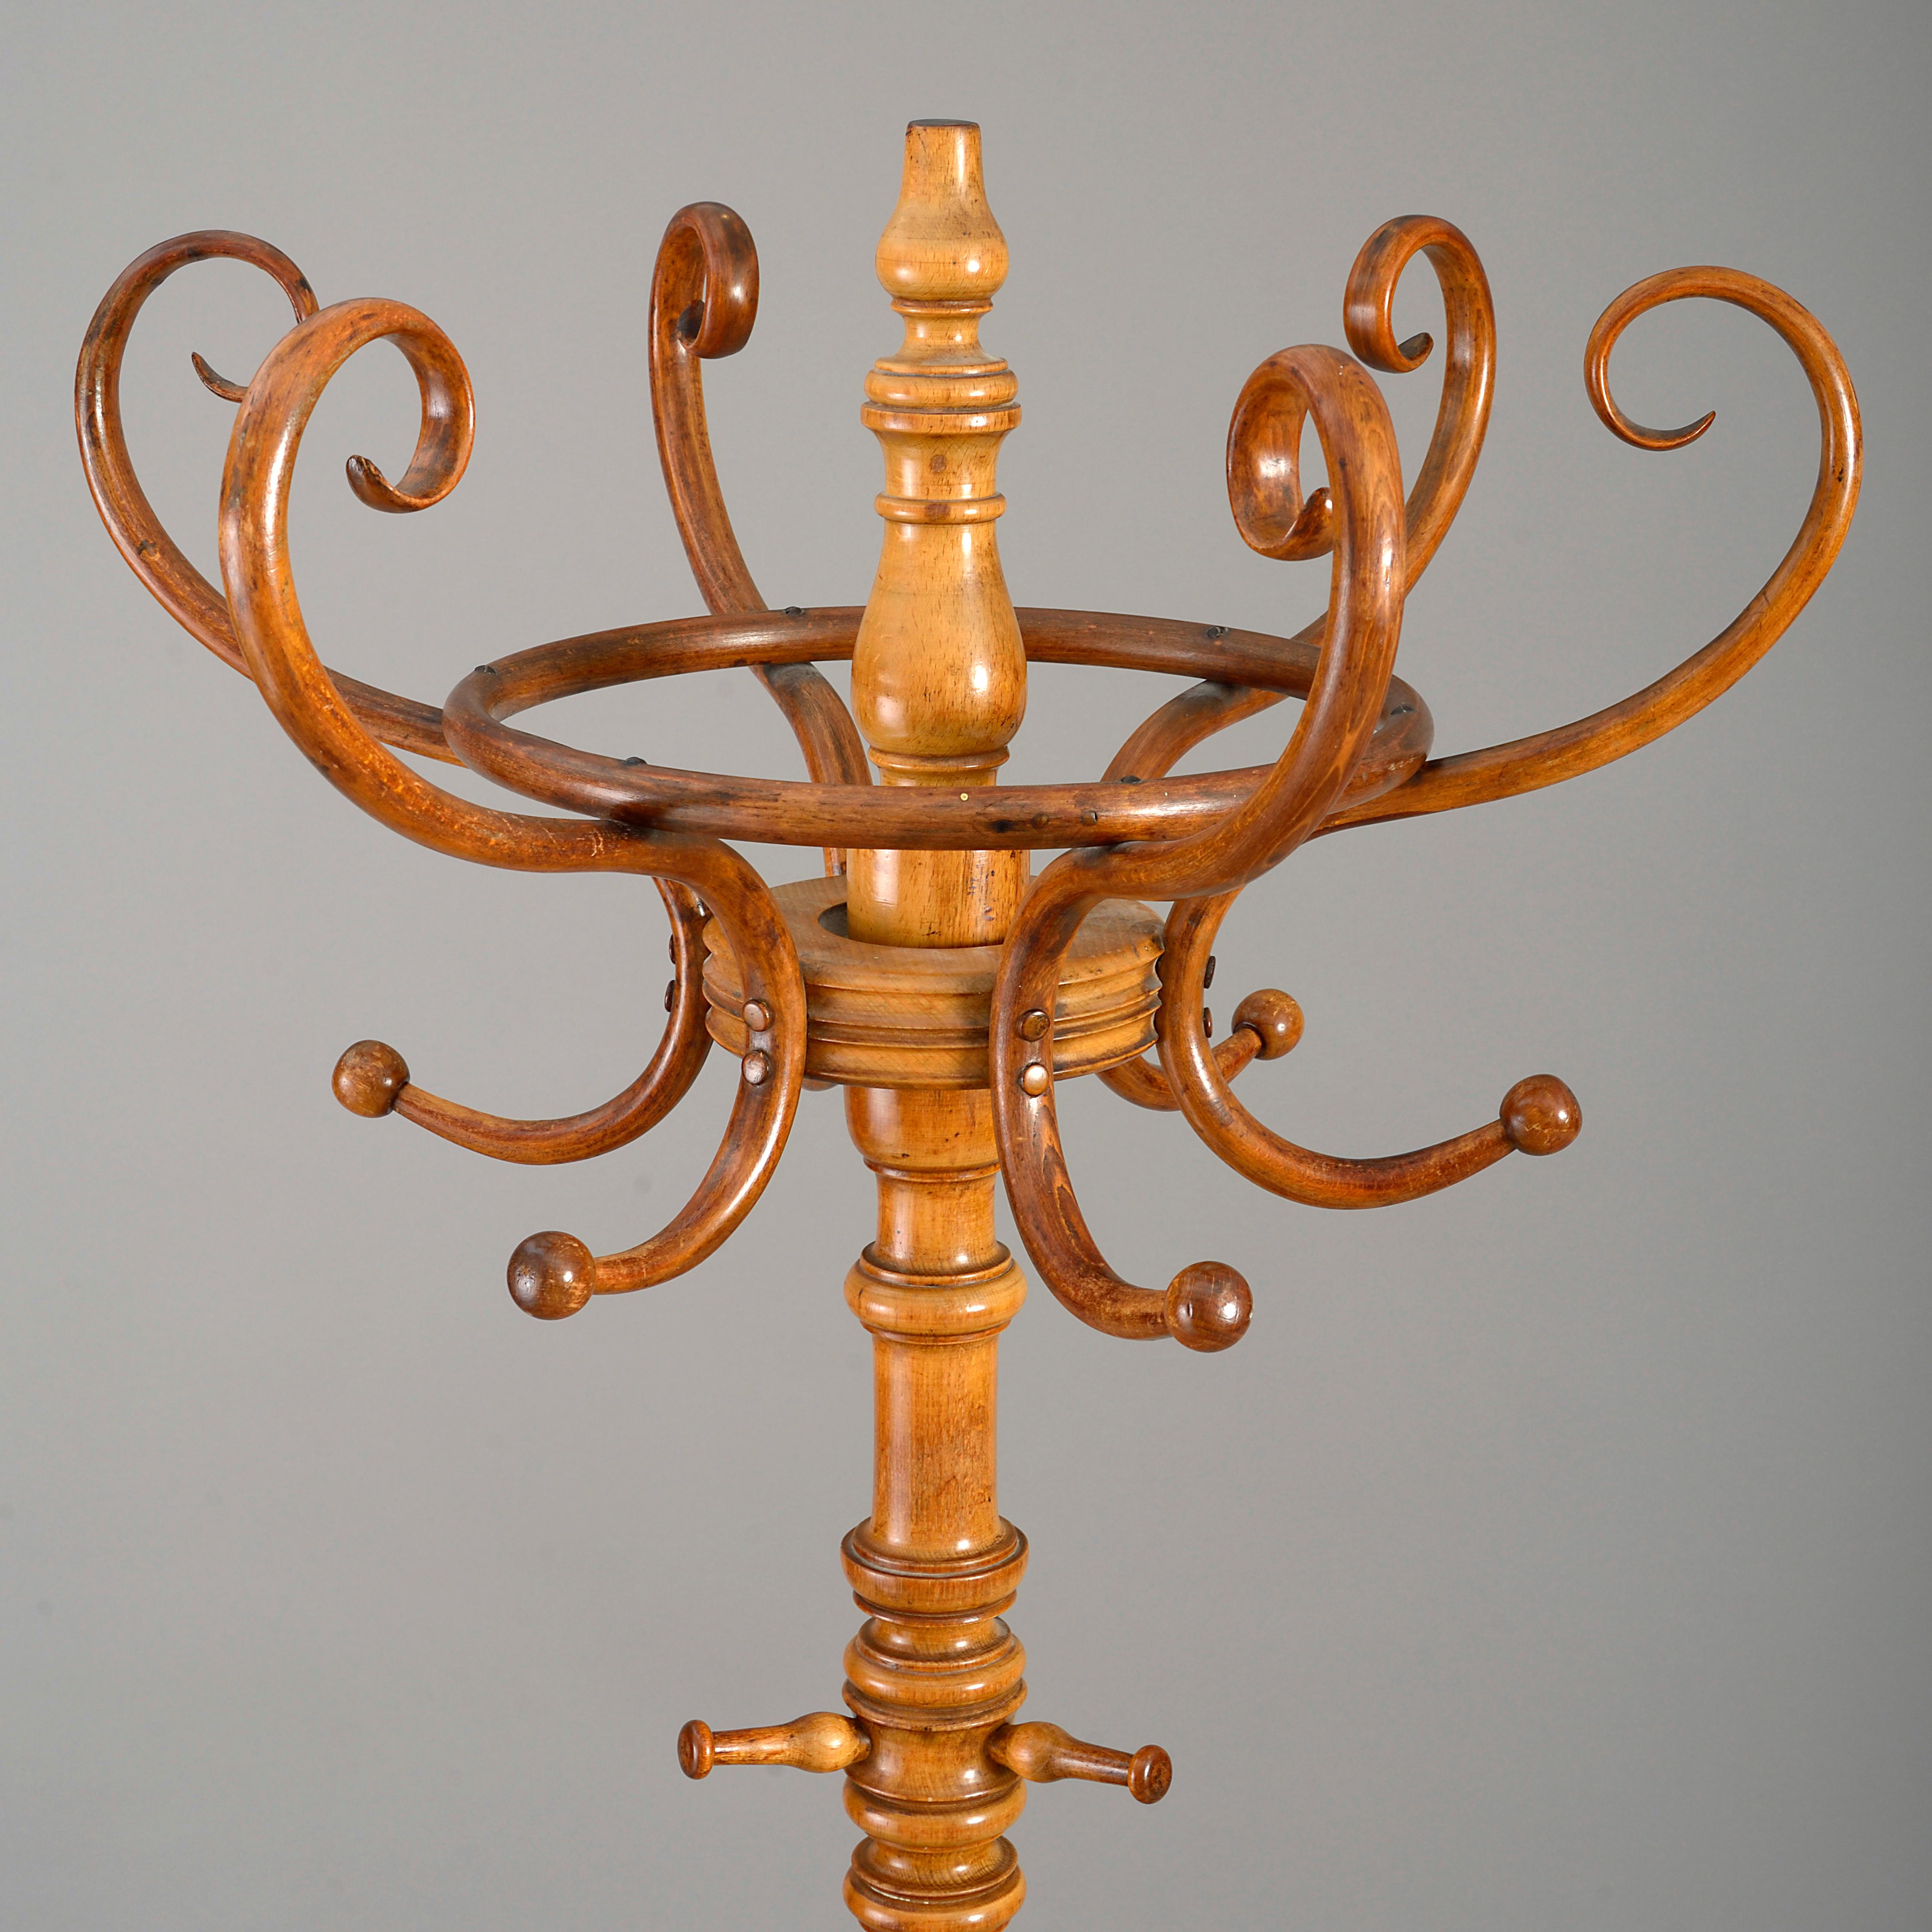 An elaborate late nineteenth century turned beech and bentwood hat and coat stand. Attributed to Thonet of Vienna.